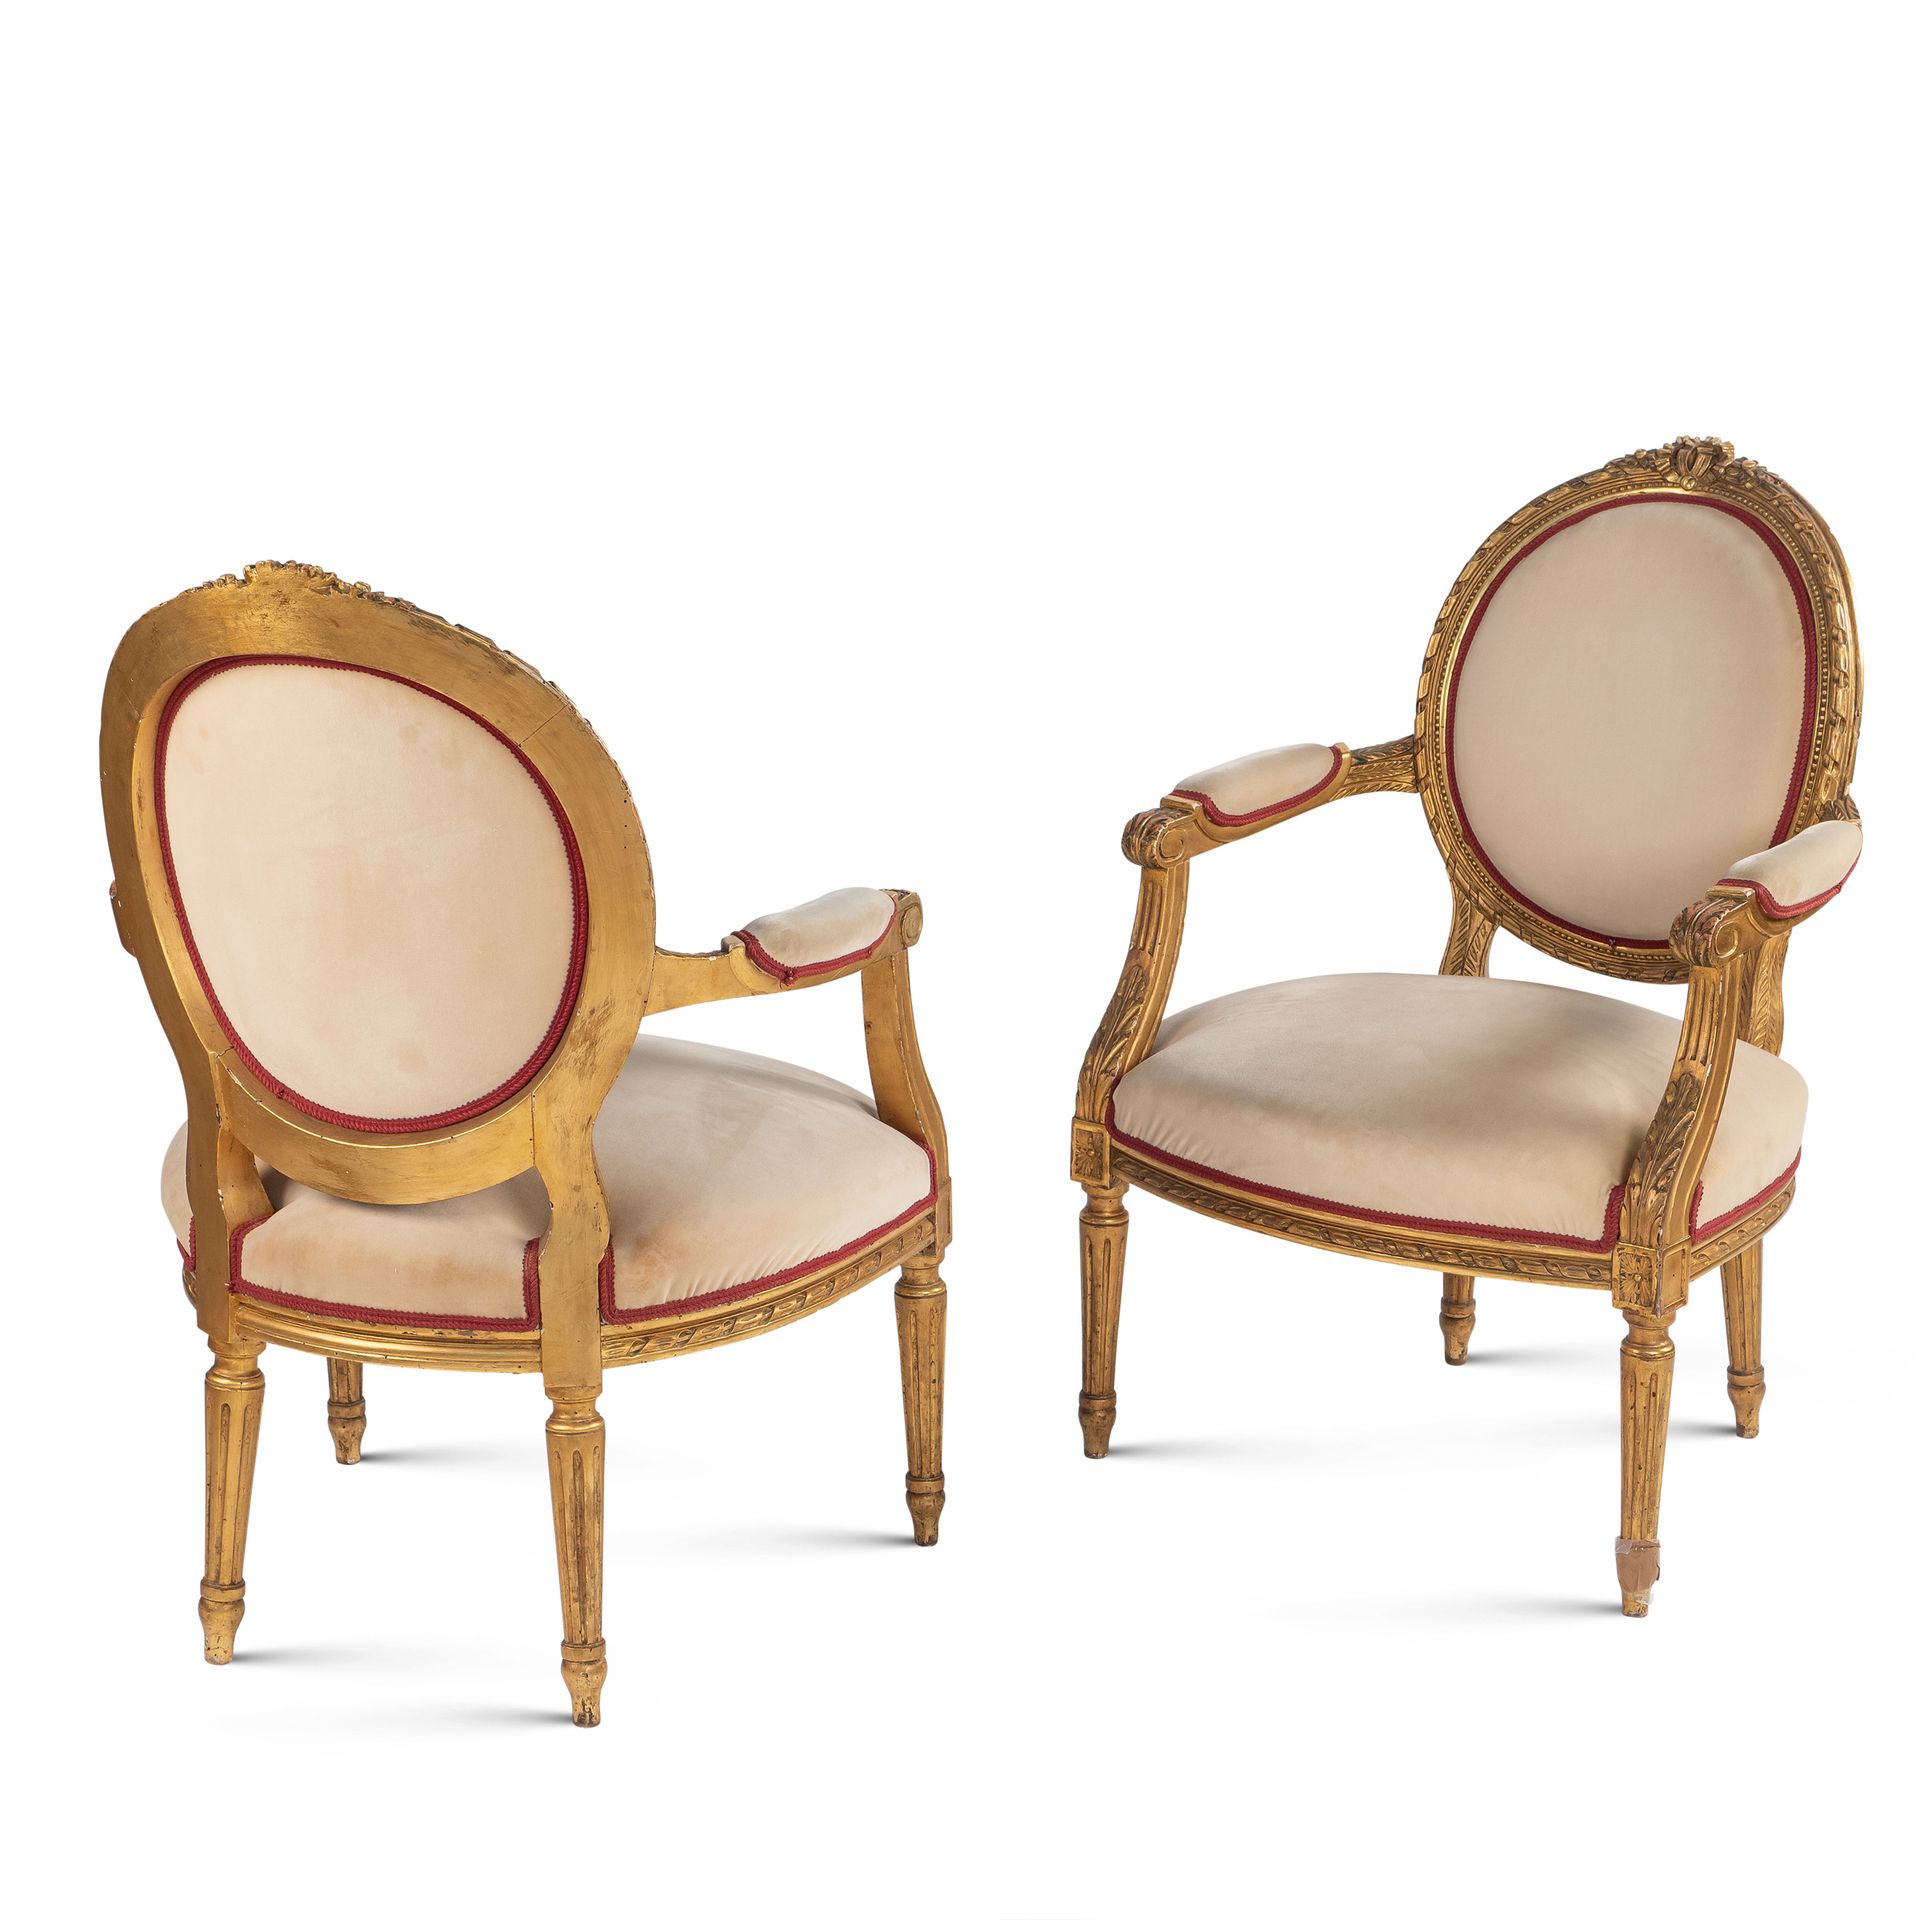 Pair of gilt wood armchairs France, 19th-20th century 83x63x56 cm. Asientos y re&hellip;